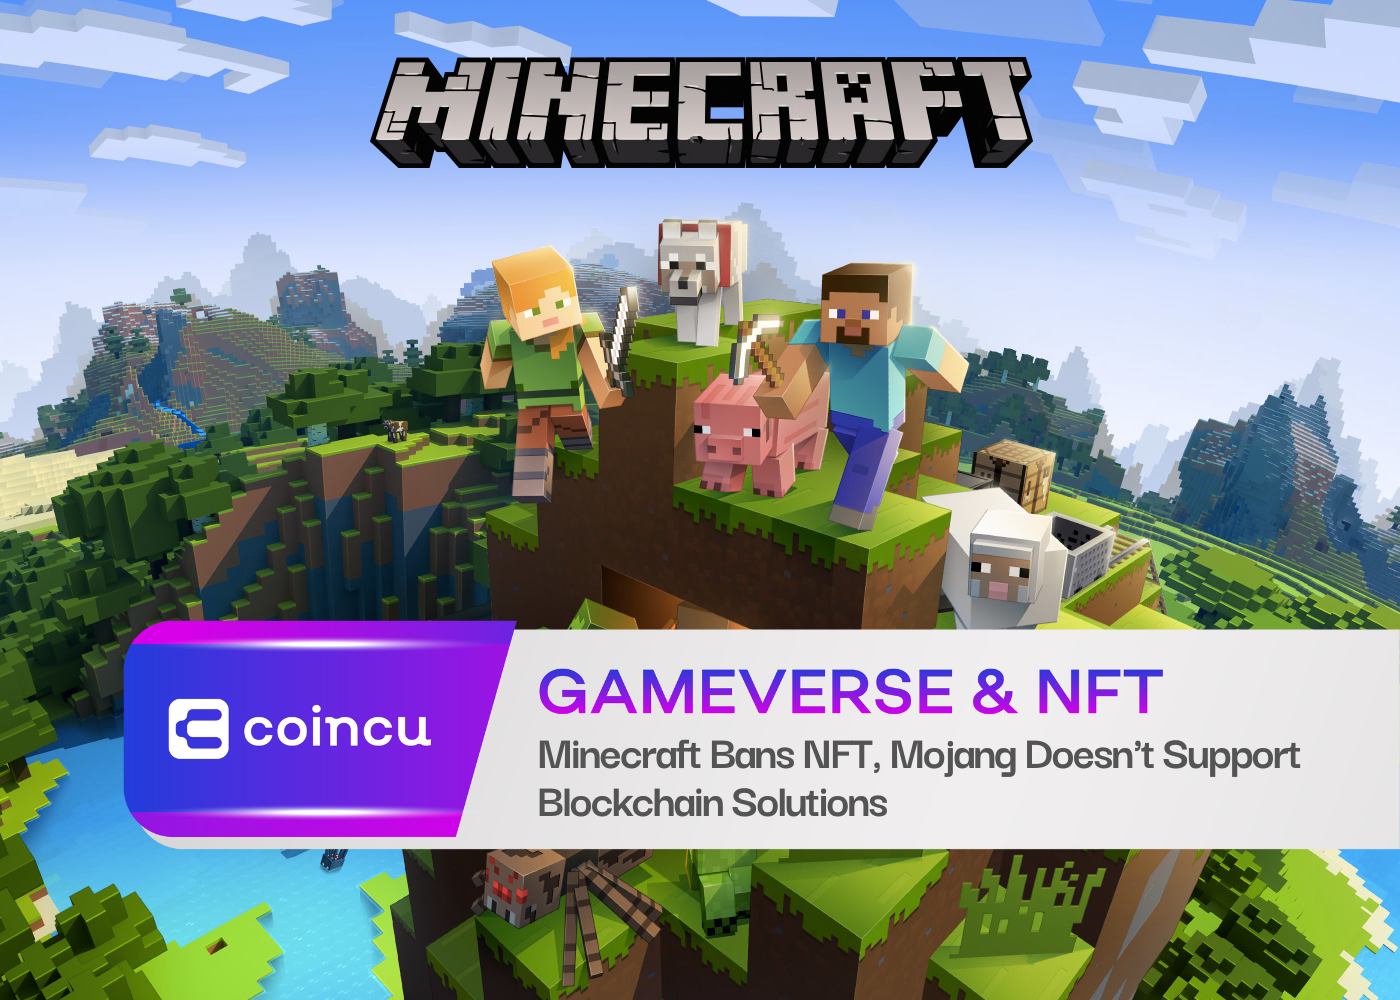 Minecraft Bans NFT, Mojang Doesn't Support Blockchain Solutions